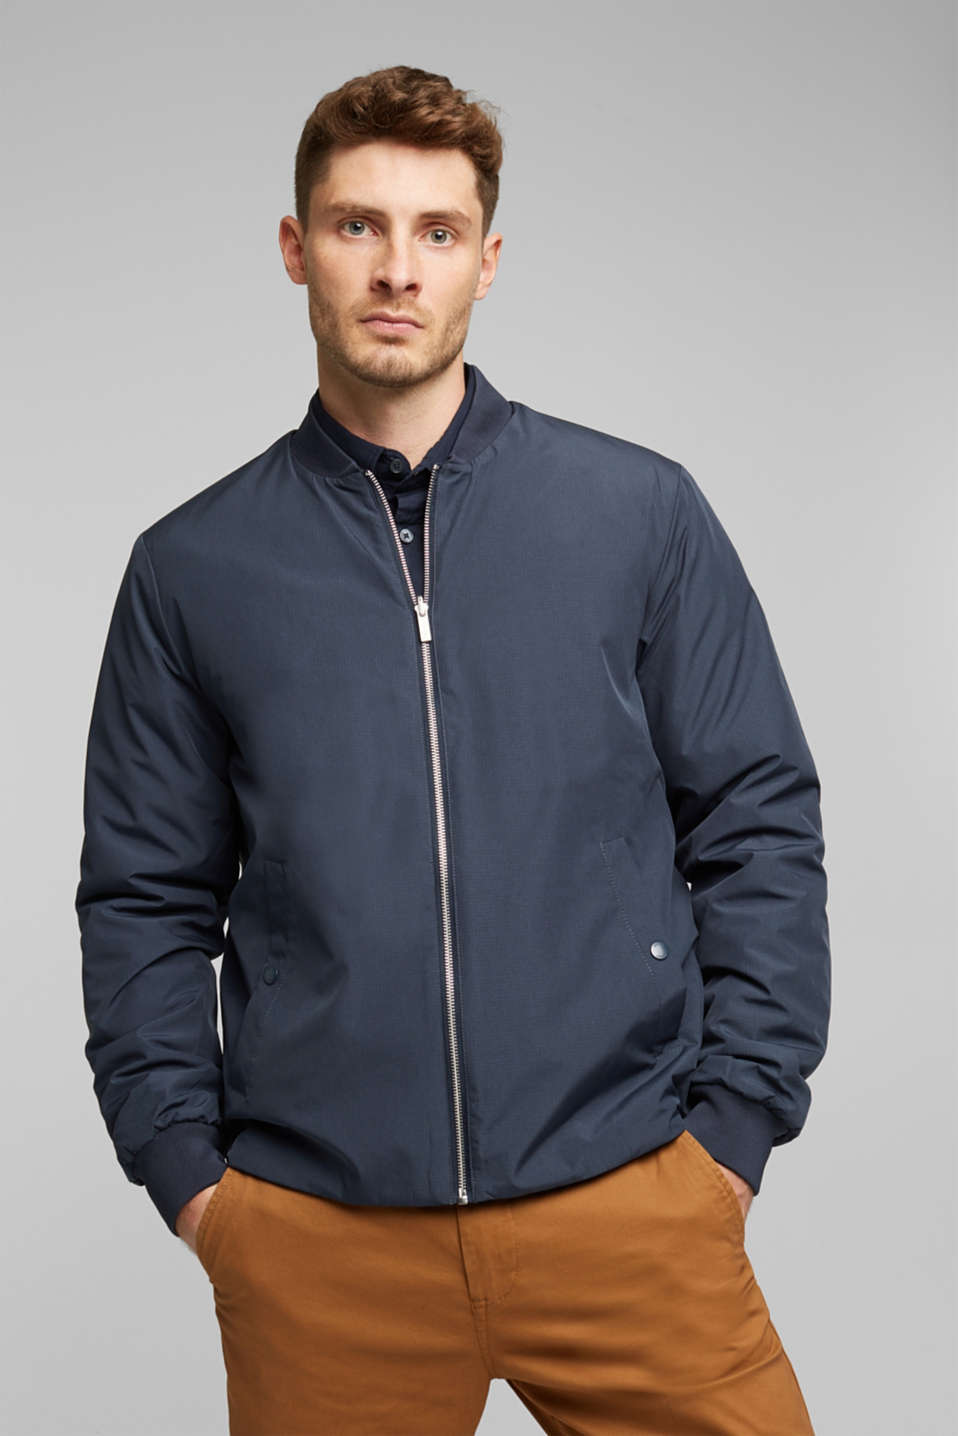 Esprit - 2-in-1 edition: padded nylon bomber jacket at our Online Shop